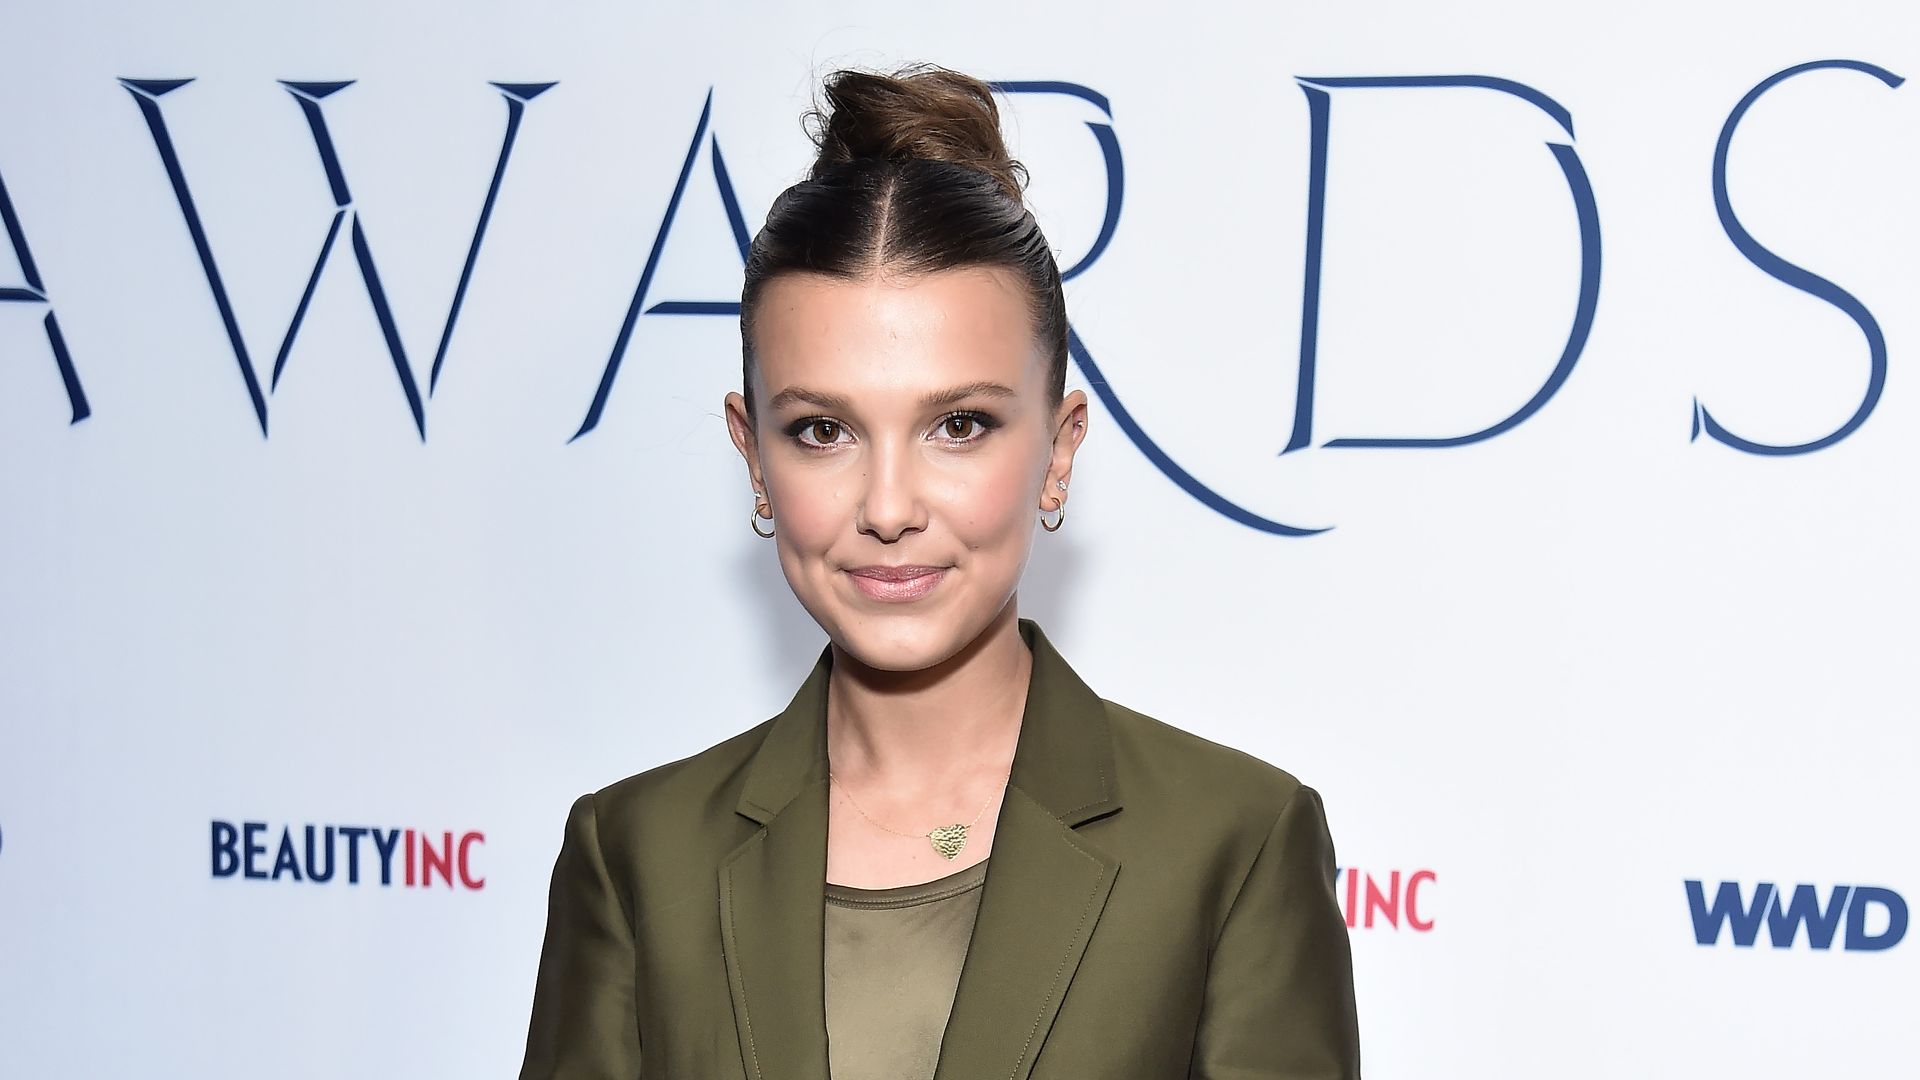 Millie Bobby Brown attends the 2019 WWD Beauty Inc Awards at The Rainbow Room on December 11, 2019 in New York City